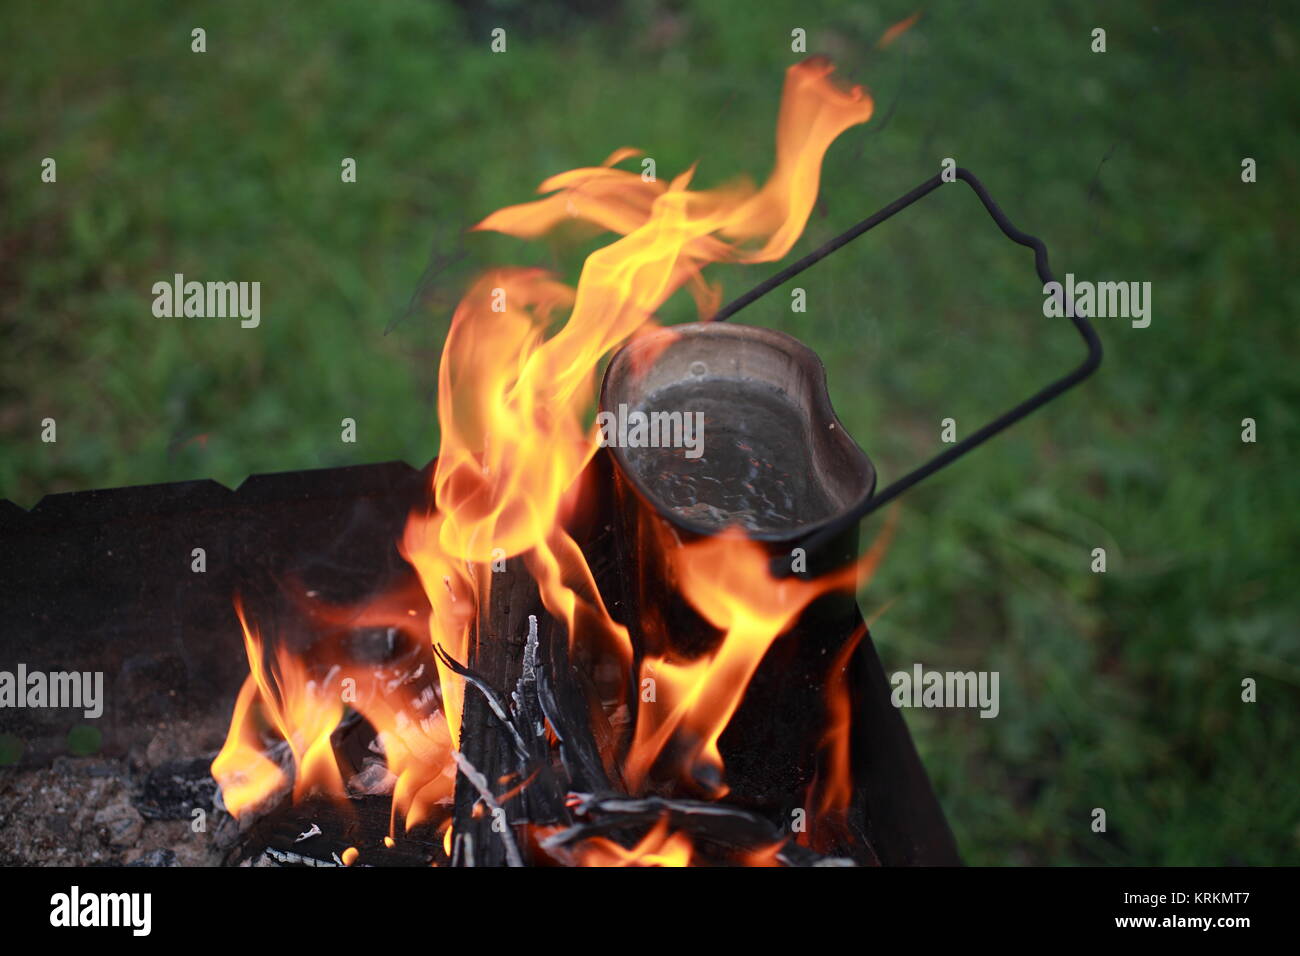 https://c8.alamy.com/comp/KRKMT7/on-burning-coals-stays-the-tourist-pot-in-which-boiling-water-in-this-KRKMT7.jpg